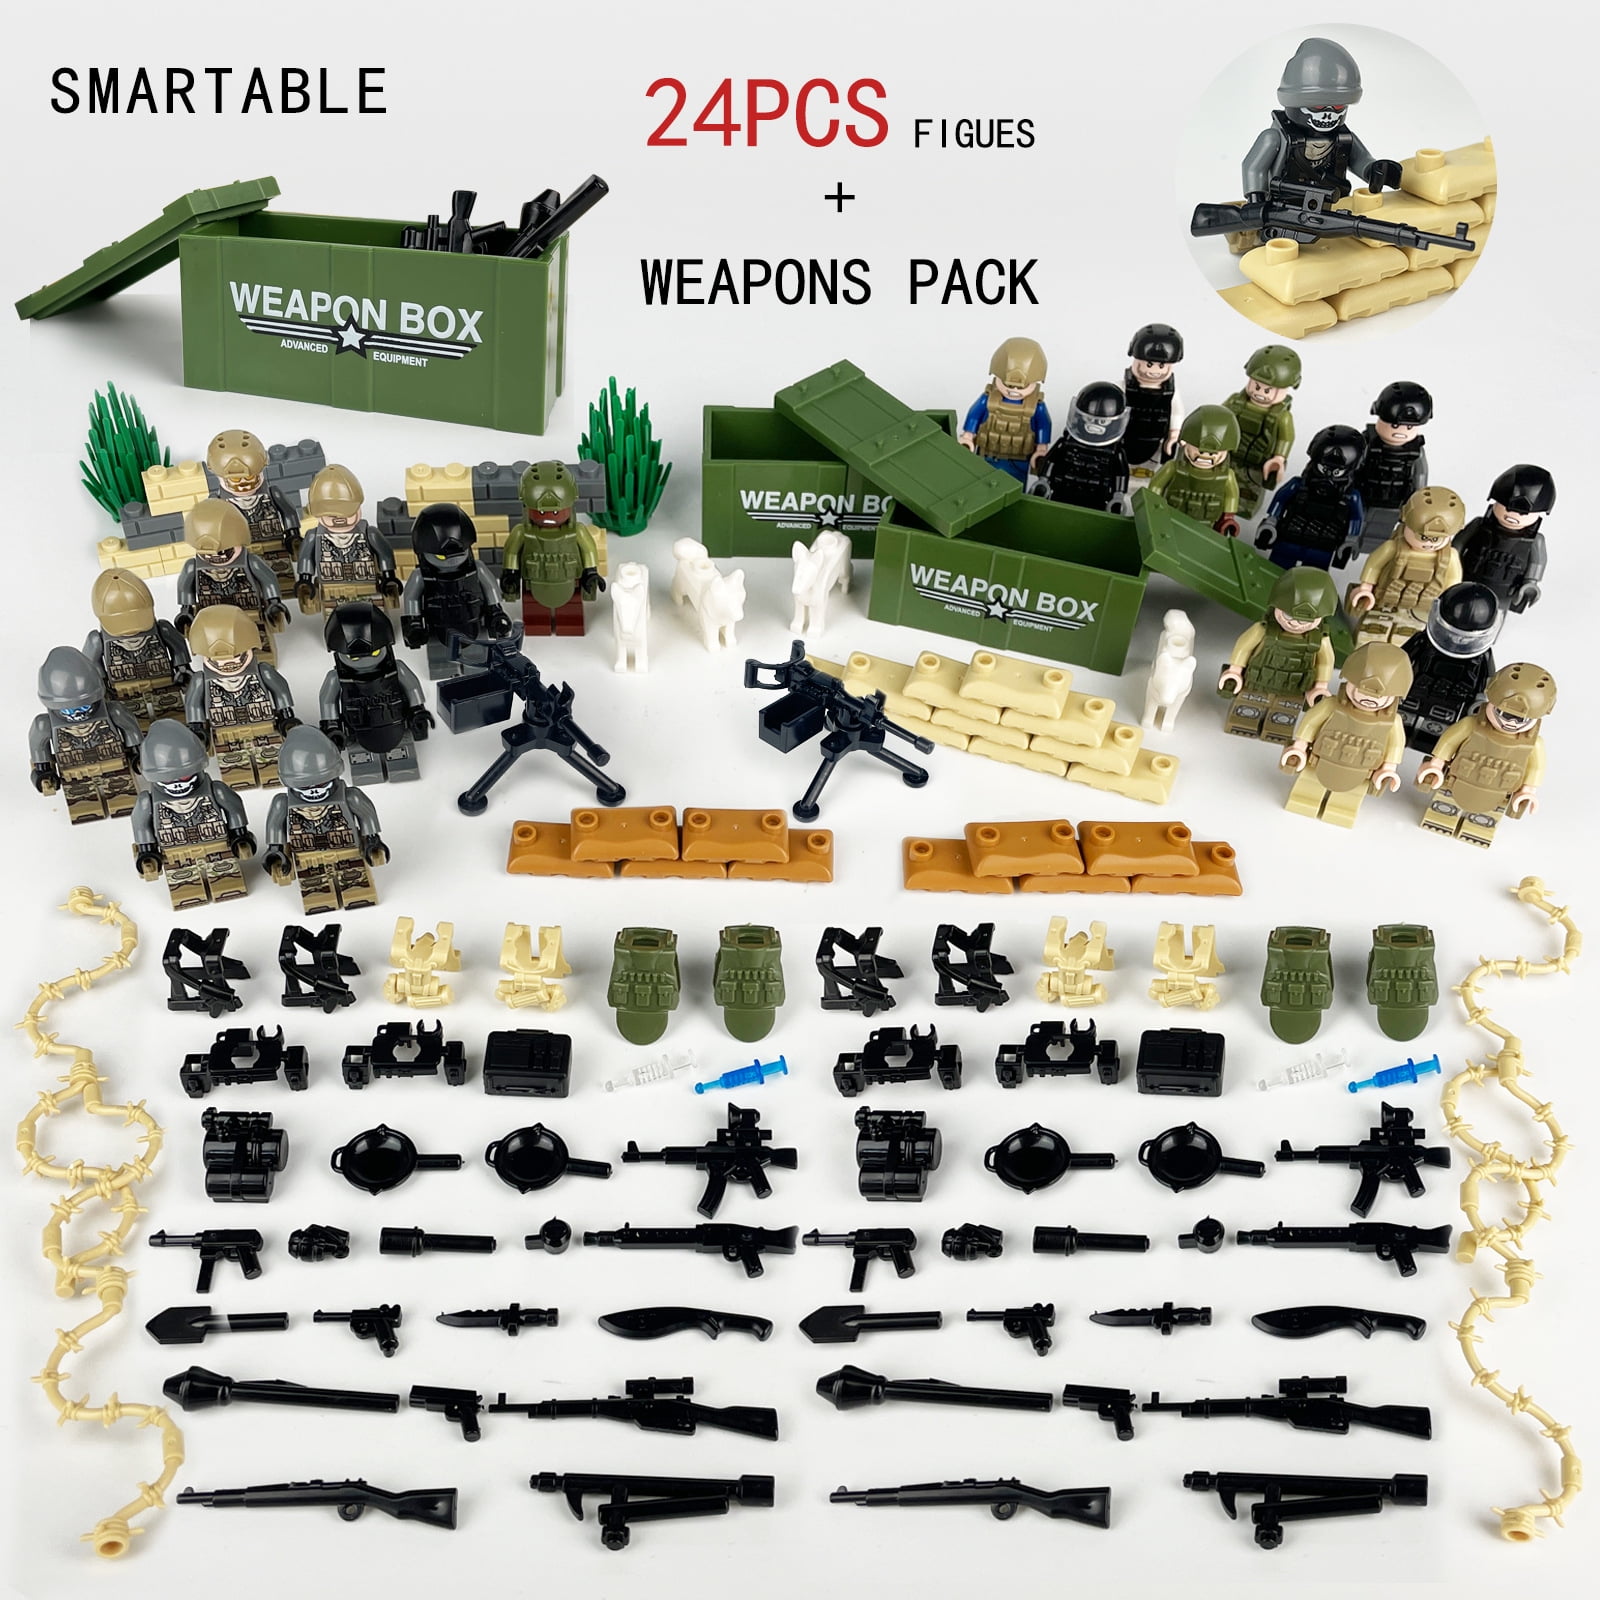 How to Build Epic Police LEGO playsets -WOMA Swat Corps 